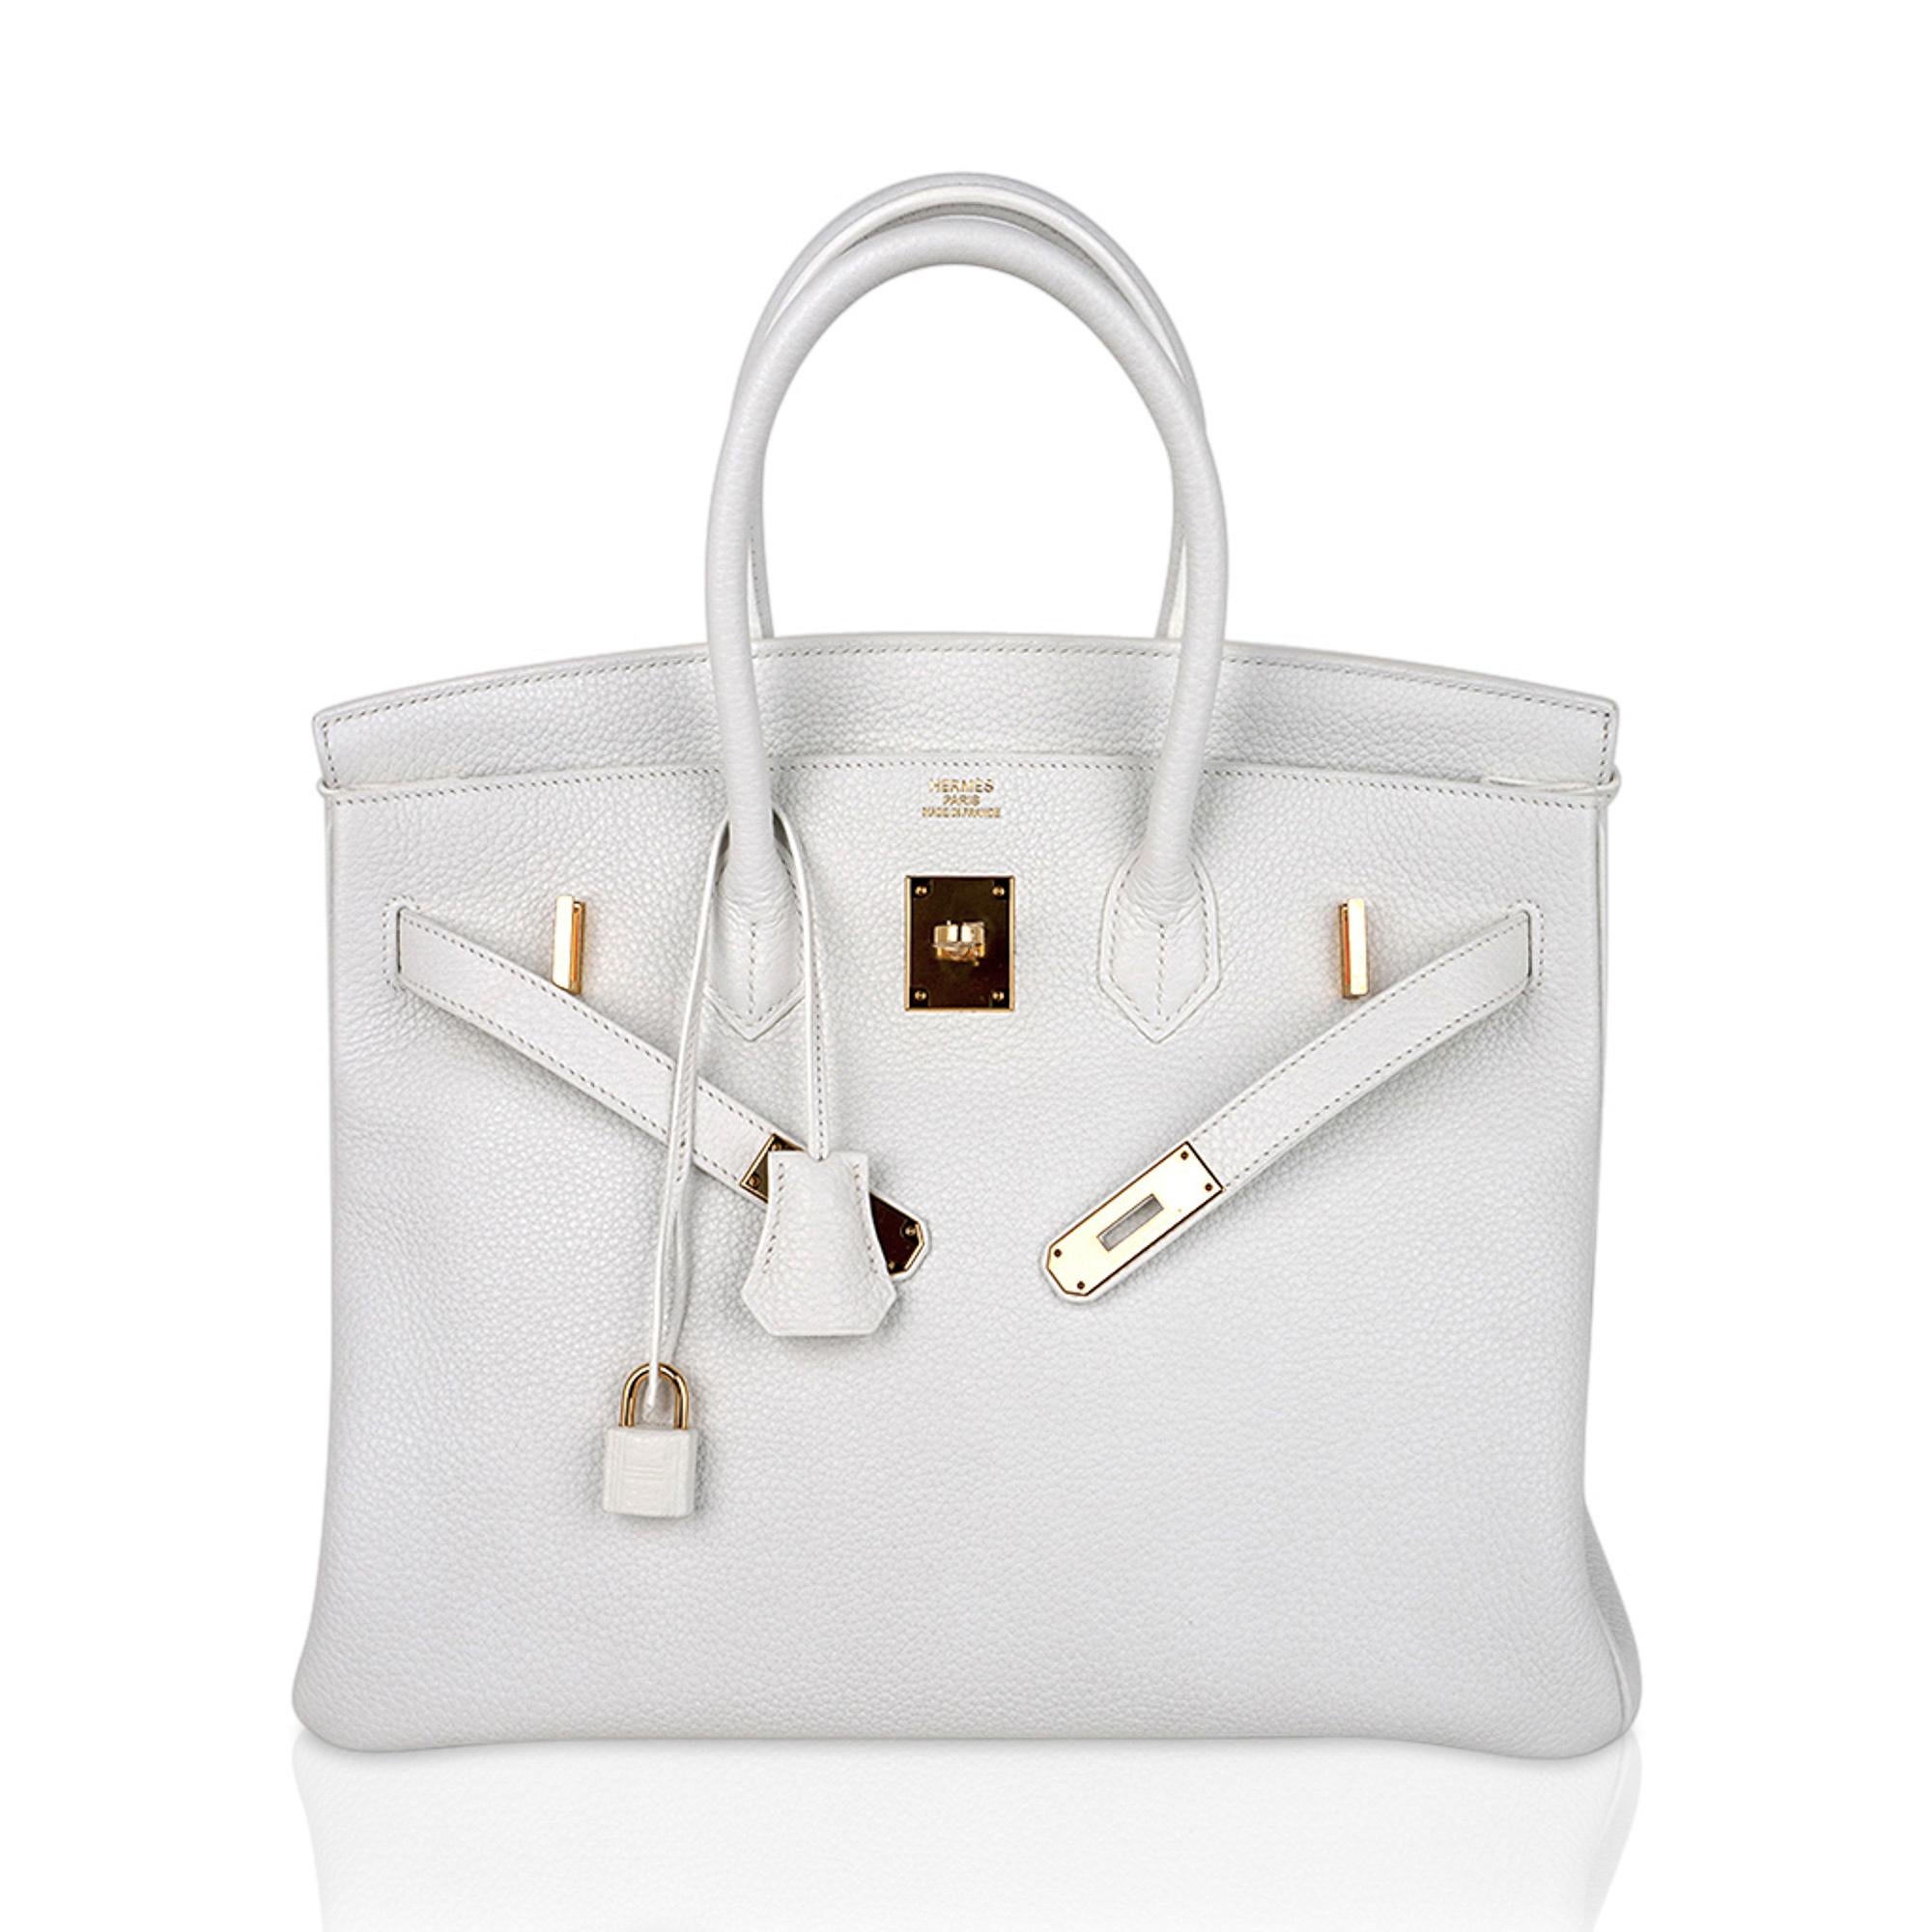 Mightychic offers a guaranteed authentic Hermes Birkin 35 bag featured in White.
Lush with Gold hardware.
A beautiful year round neutral color., white is the most rare of all Hermes colours produced in leather.
This Hermes Birkin is created with